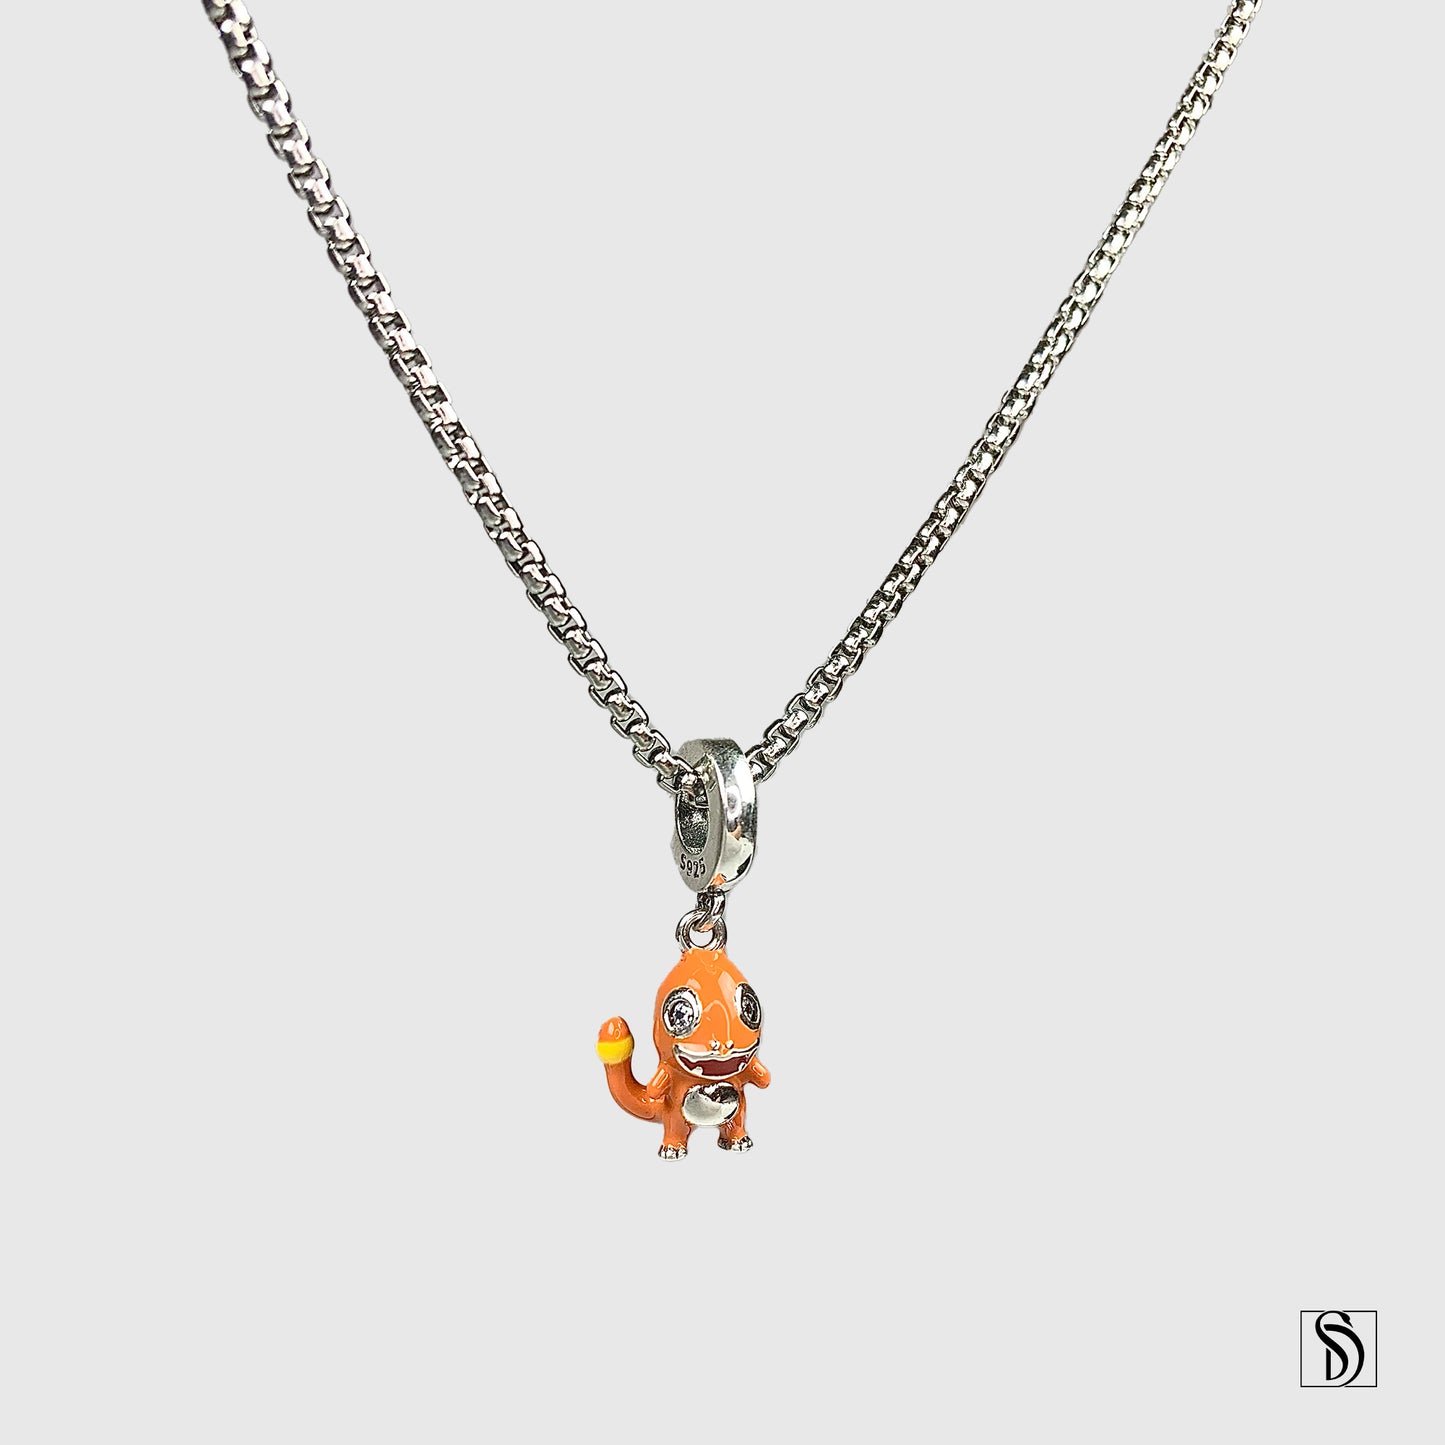 Chamander Fire Type Pokemon Charm Necklace